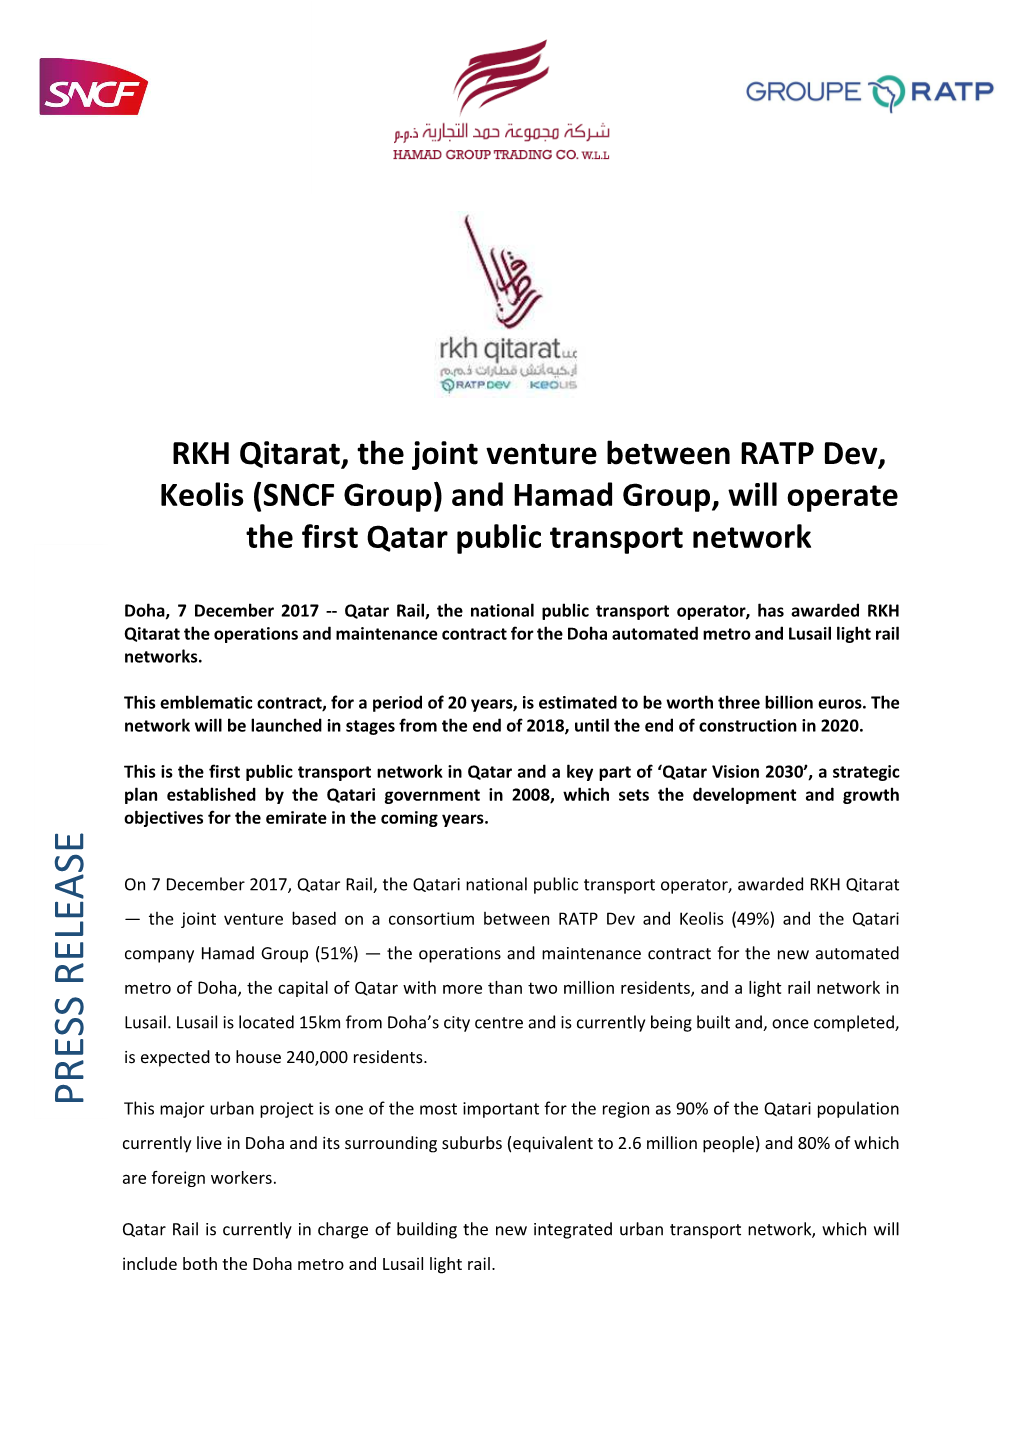 RKH Qitarat, the Joint Venture Between RATP Dev, Keolis (SNCF Group) and Hamad Group, Will Operate the First Qatar Public Transport Network